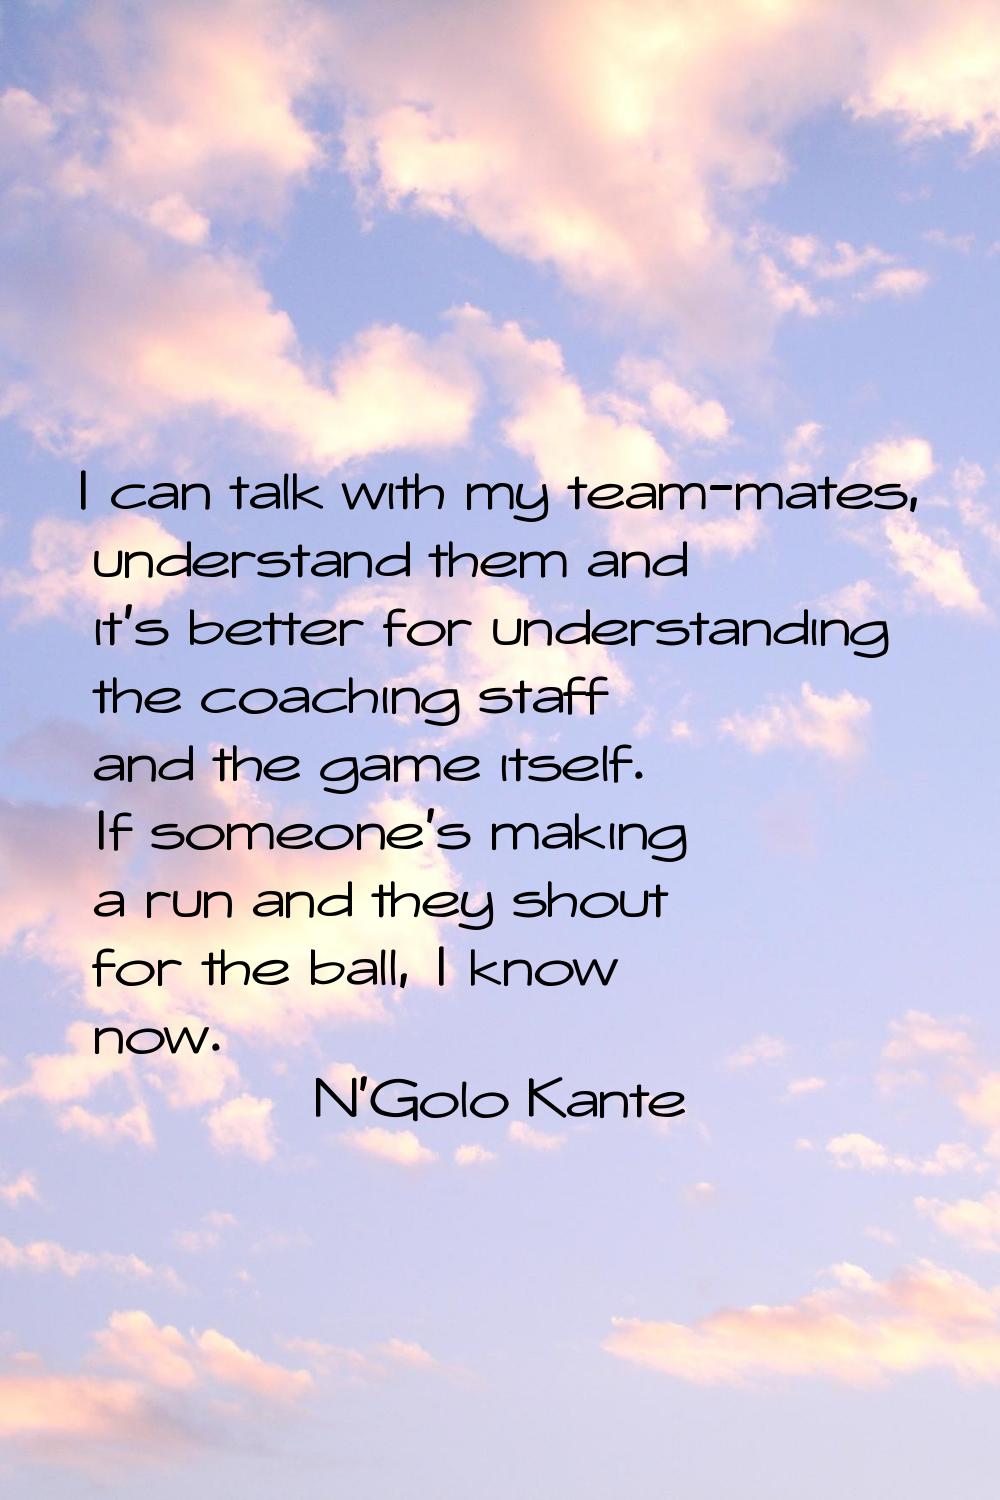 I can talk with my team-mates, understand them and it's better for understanding the coaching staff